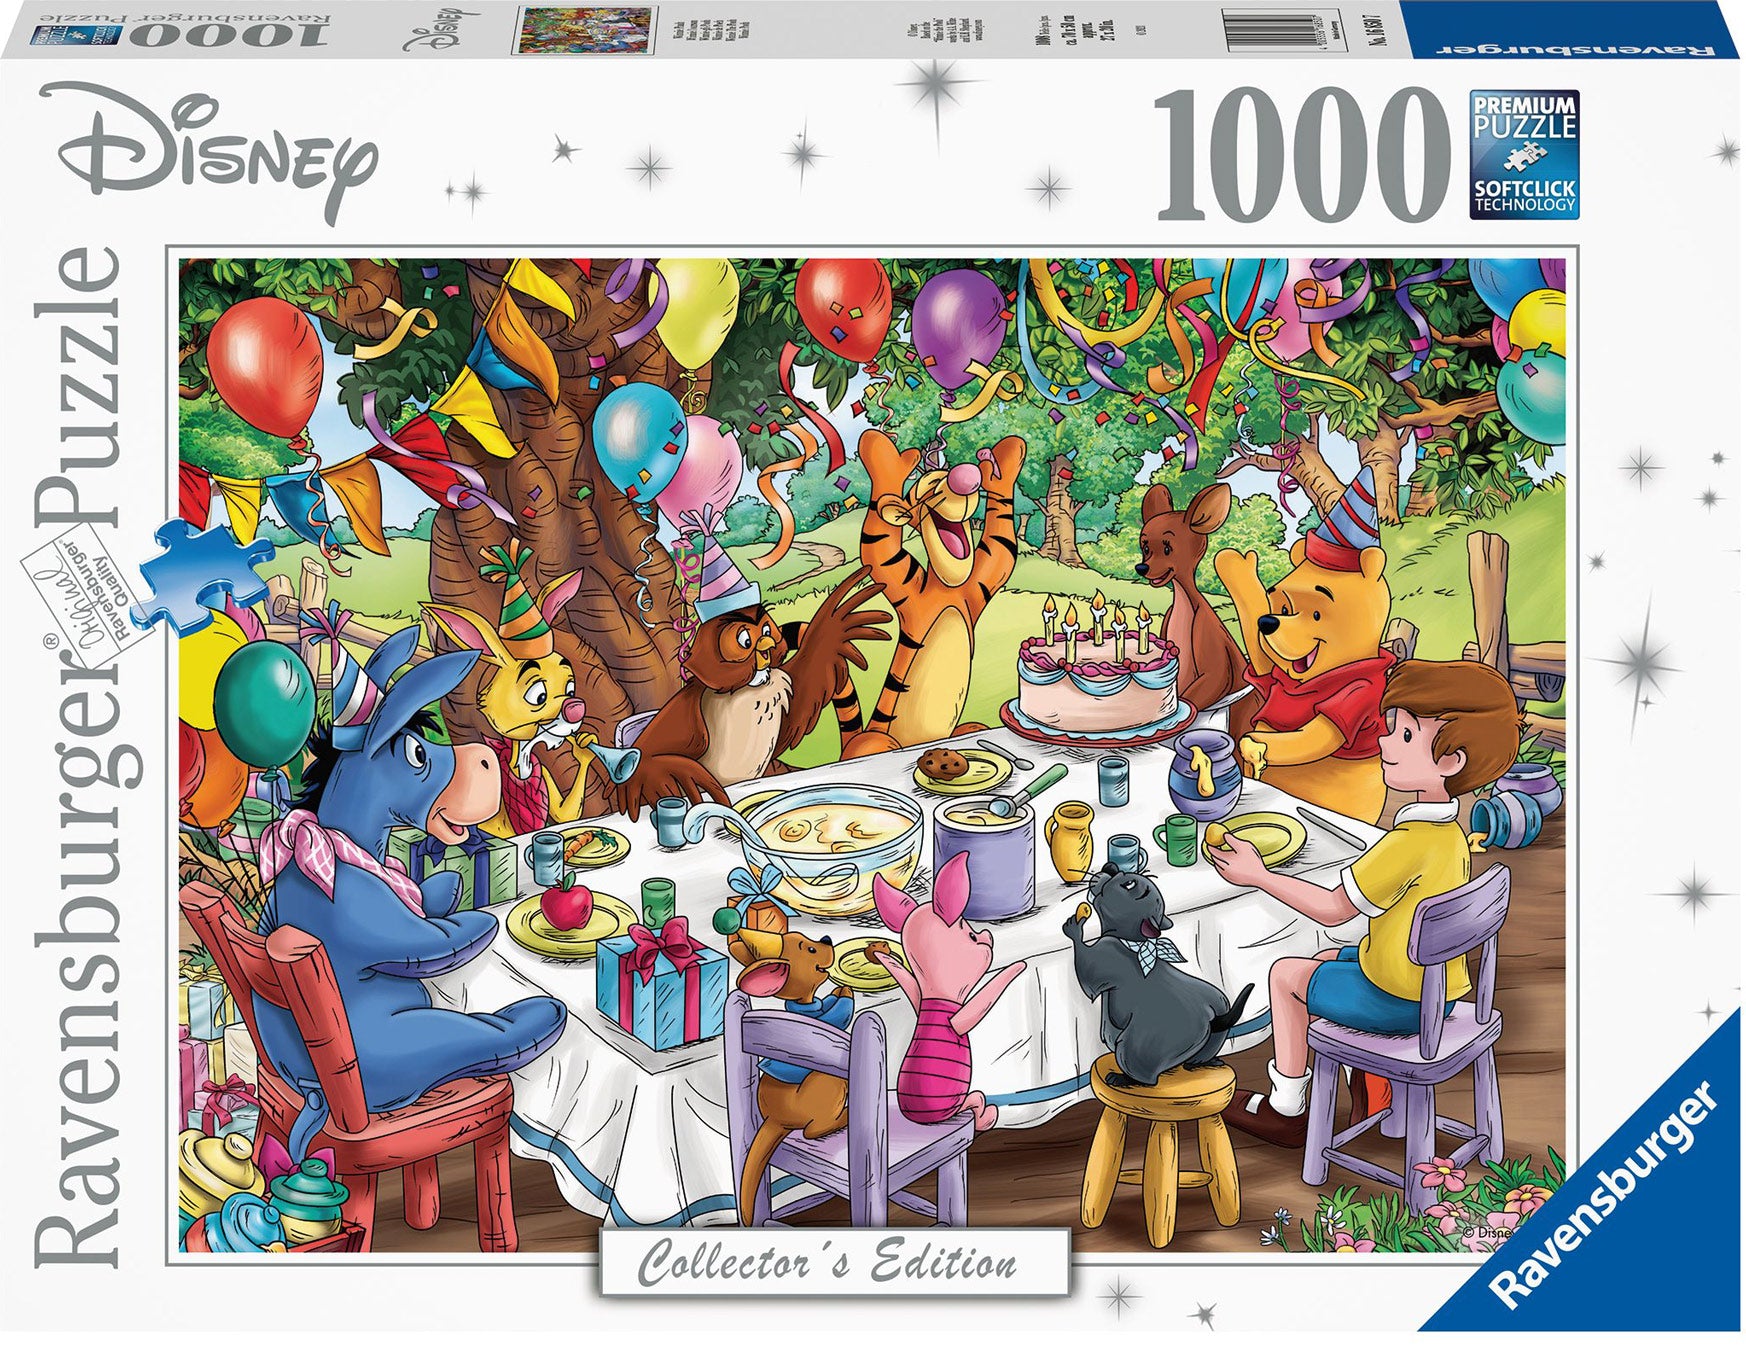 Disney Collector's Edition Winnie the Pooh (1000 pc puzzle)